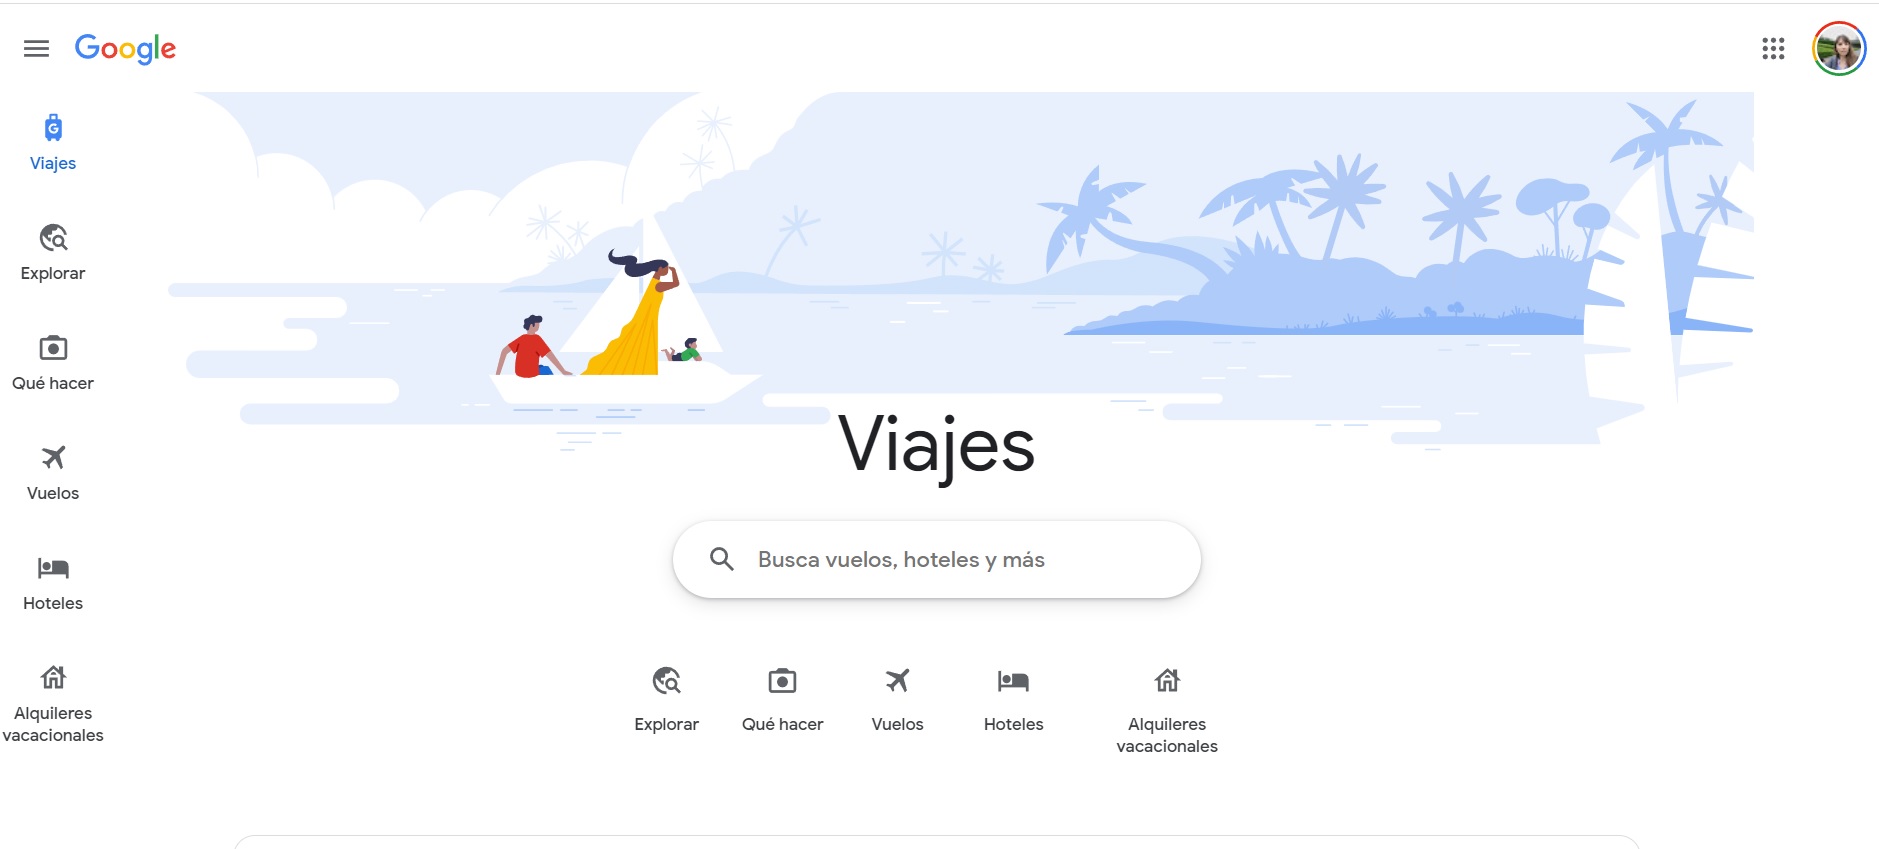 Google Travel has a space dedicated to flights, as well as other tools